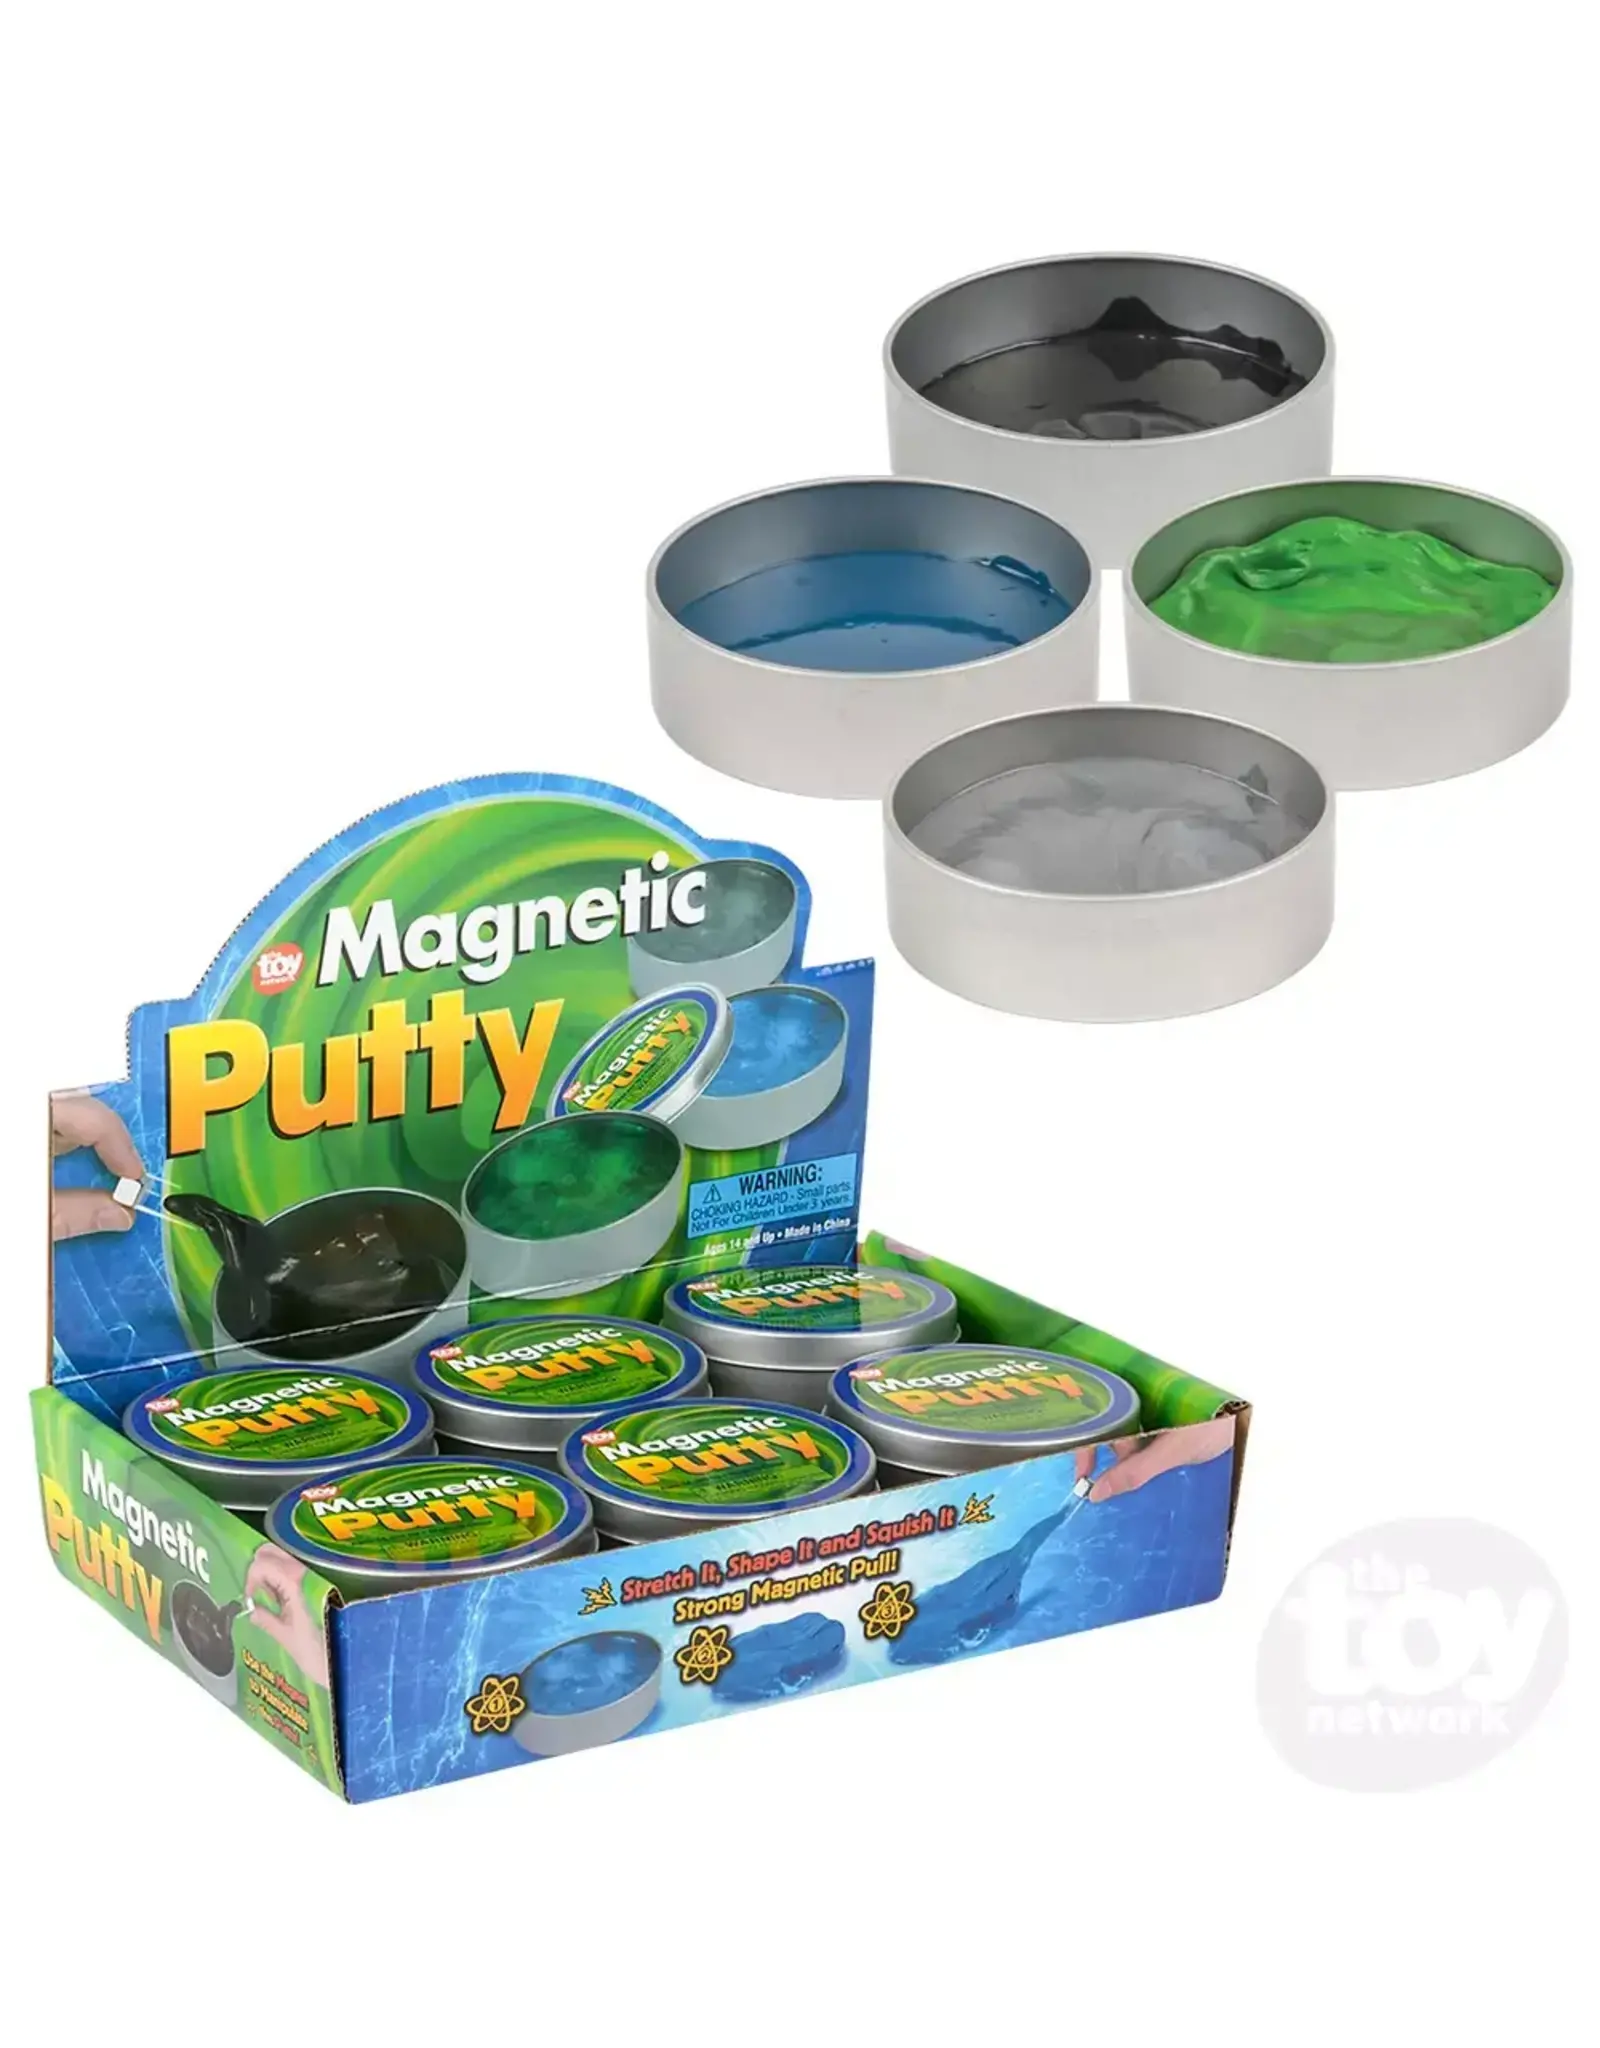 3.5" Magnetic Putty